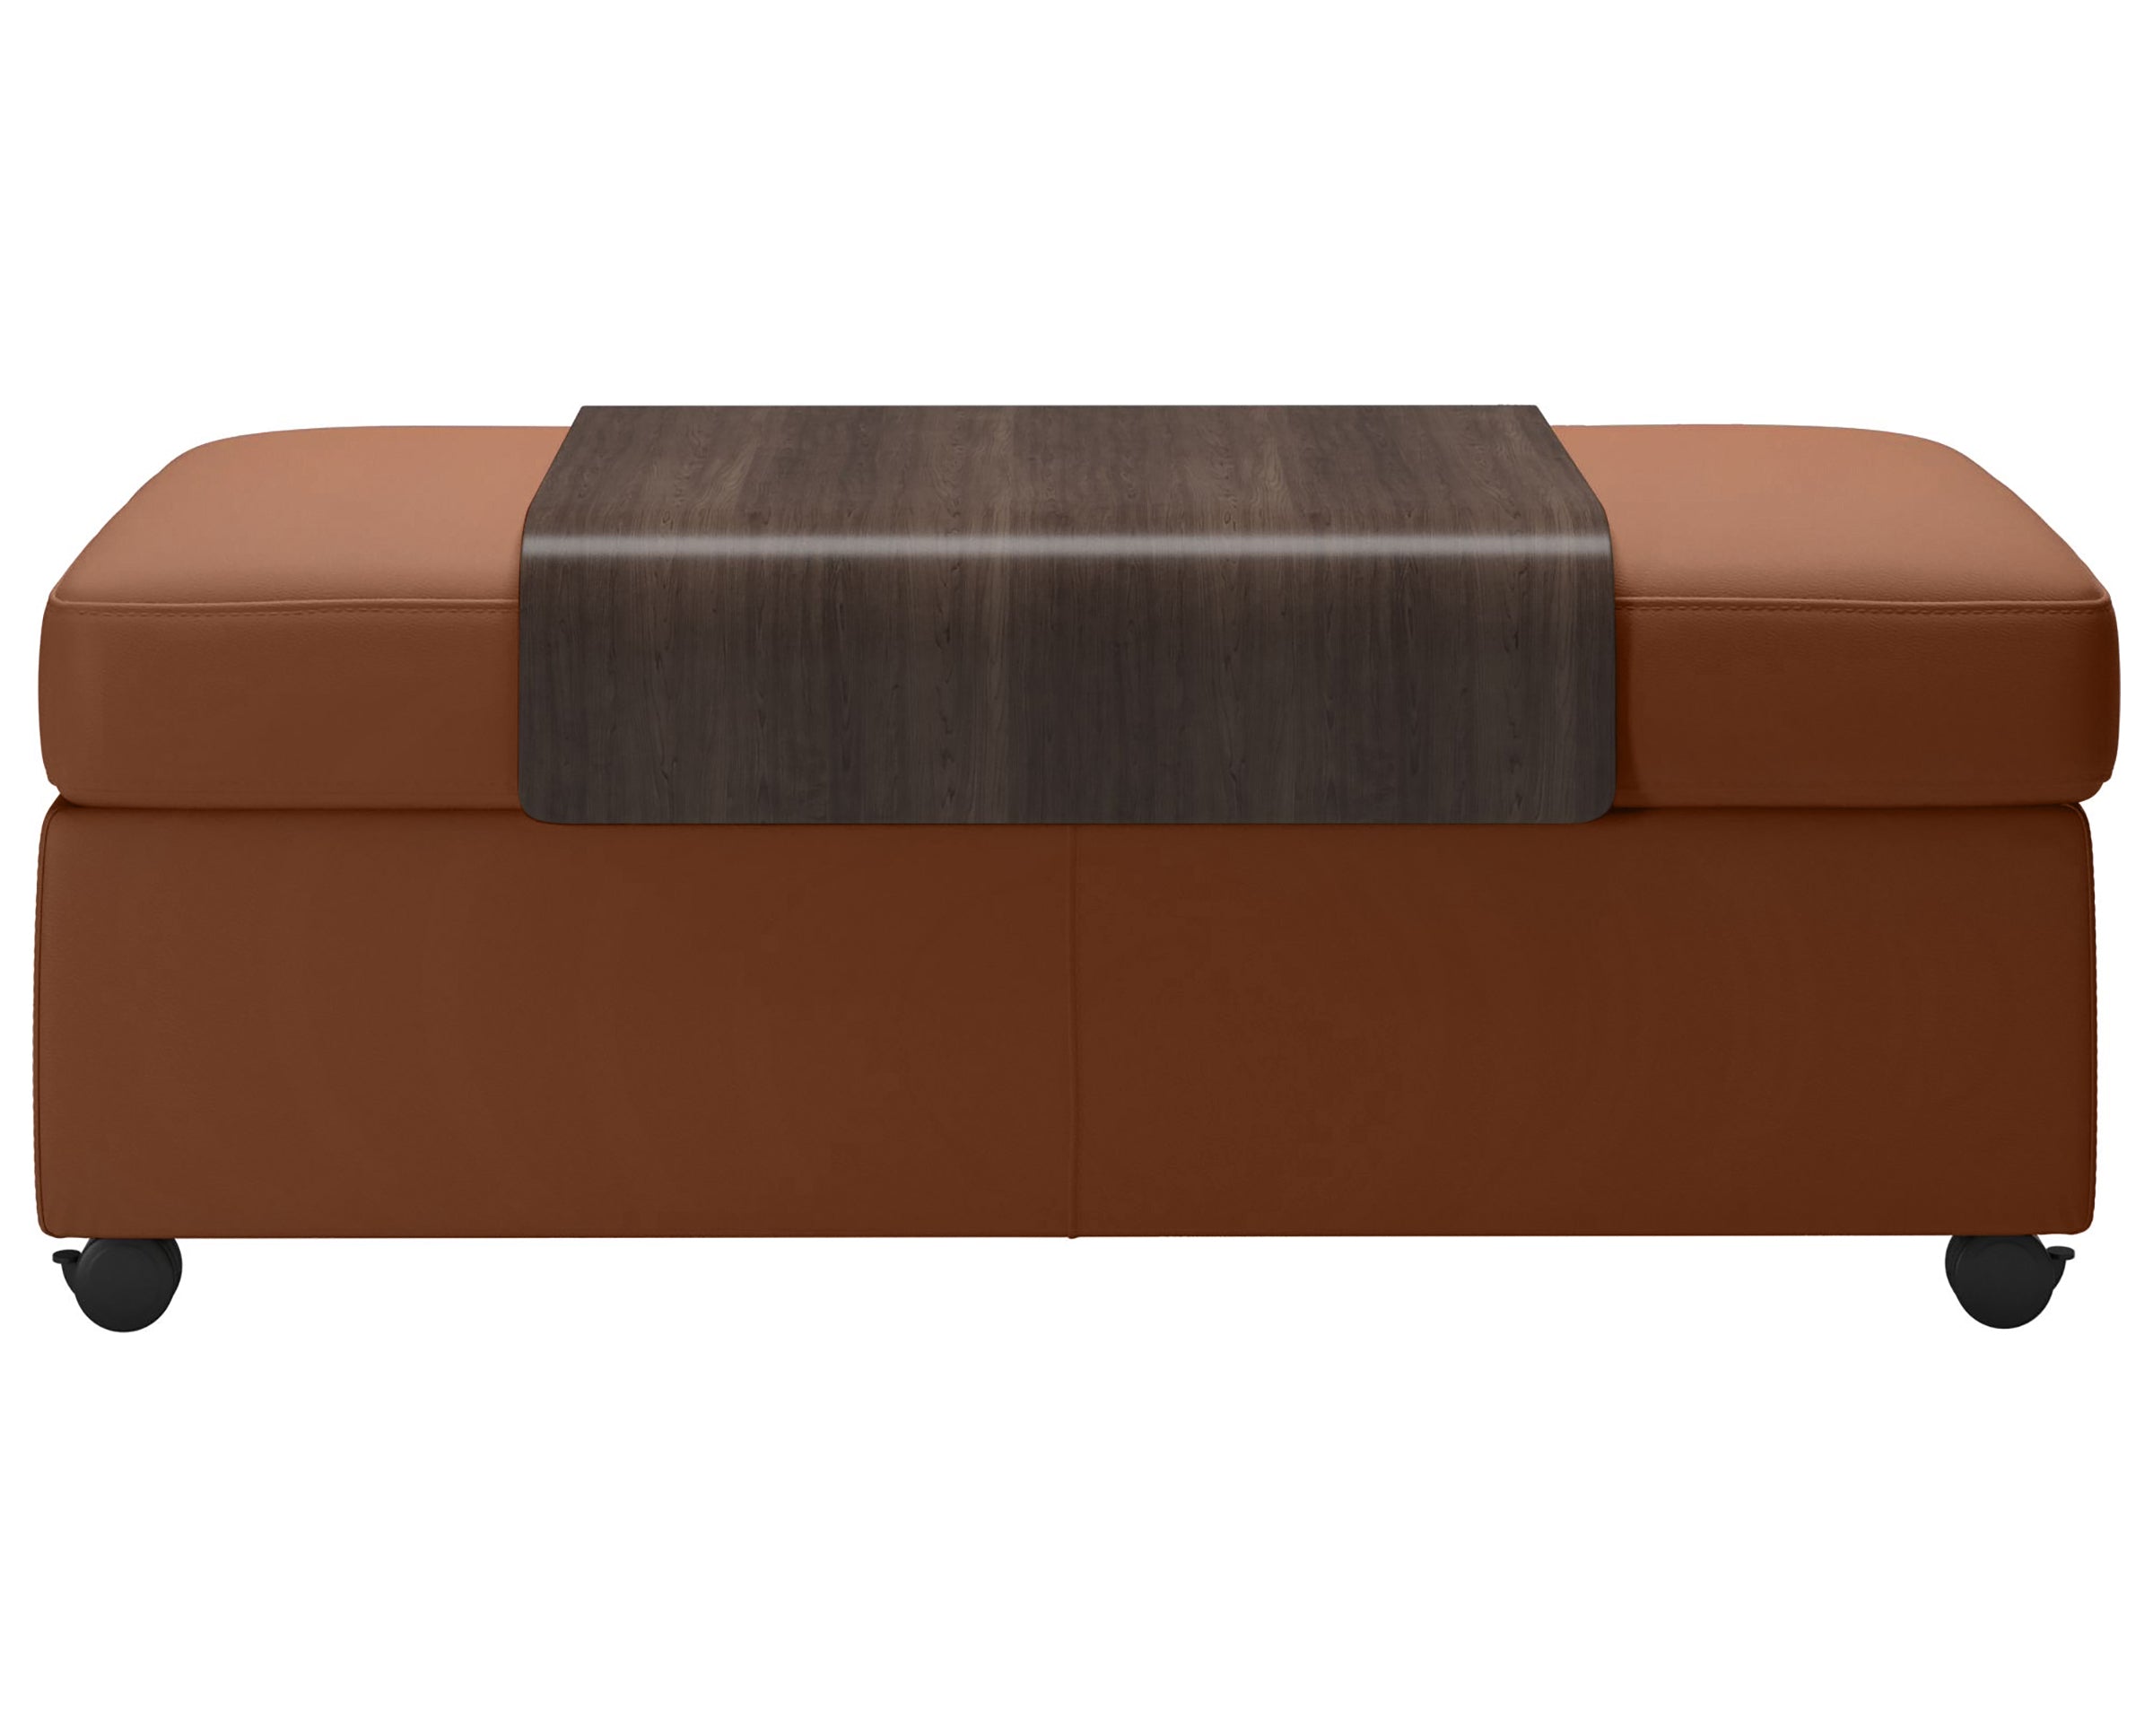 Paloma Leather New Cognac and Wenge Finish | Stressless Double Ottoman with Table | Valley Ridge Furniture